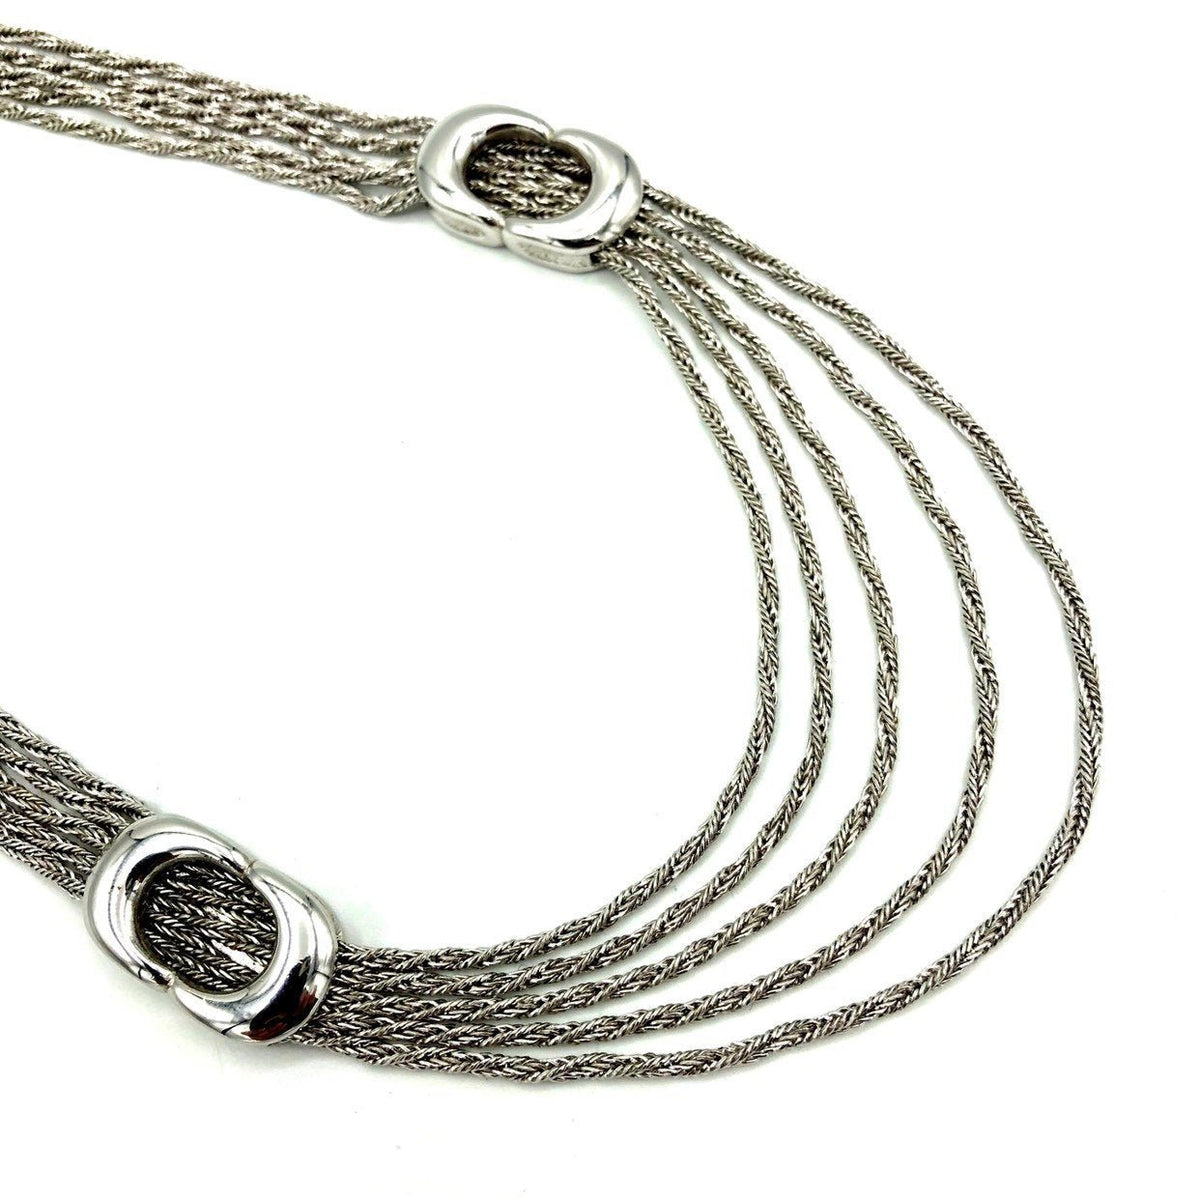 Givenchy Silver Multi-Chain Vintage Necklace - 24 Wishes Vintage Jewelry